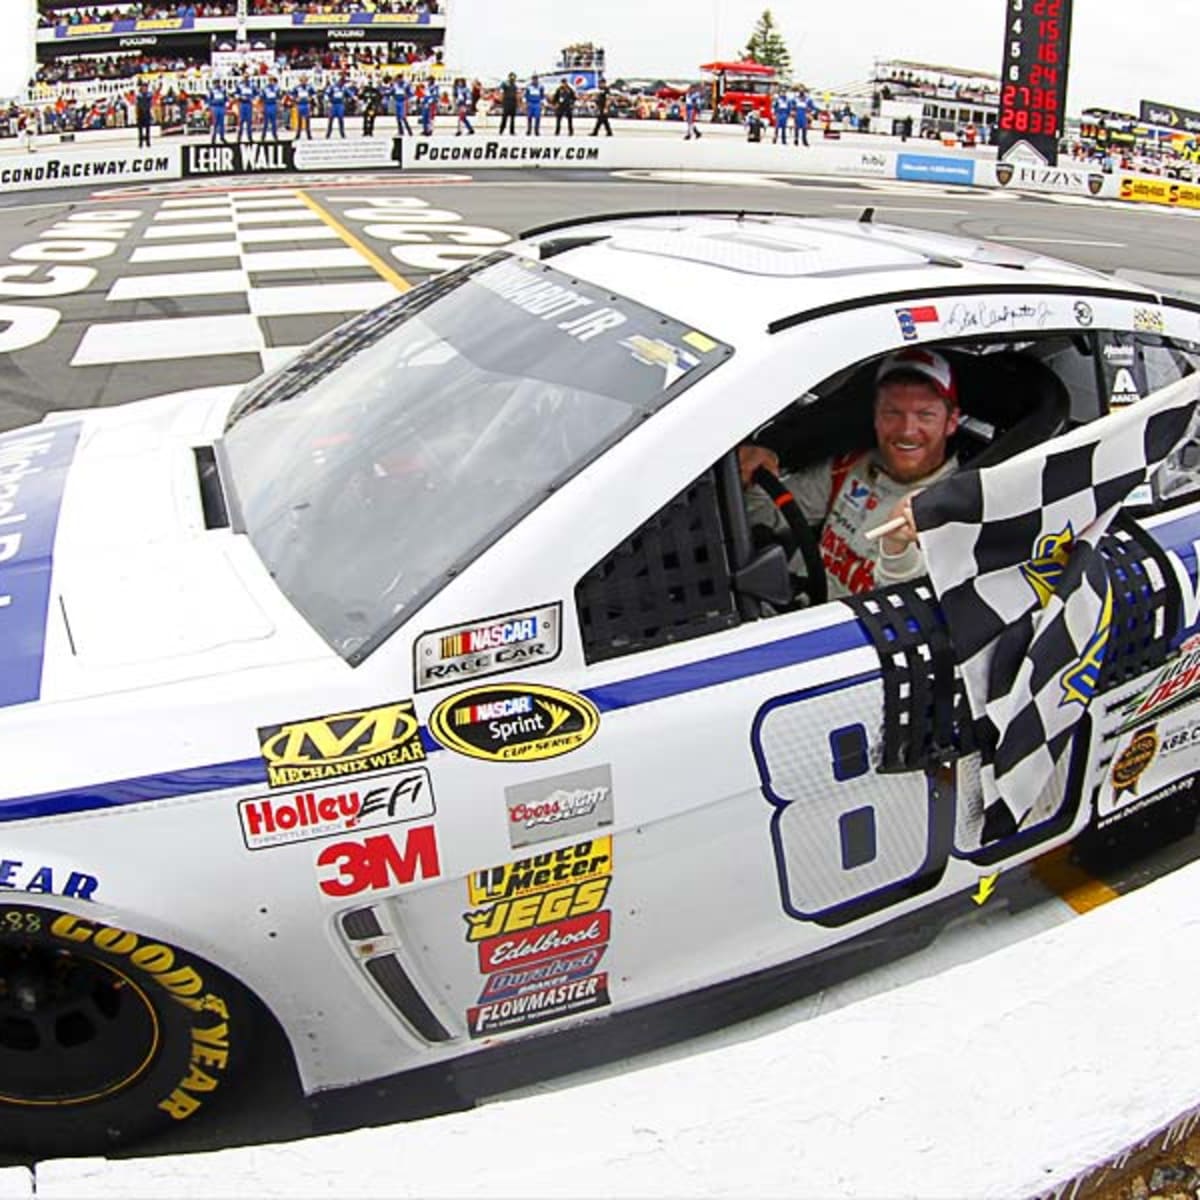 Dale Earnhardt Jr., No. 88 team, hitting on all cylinders